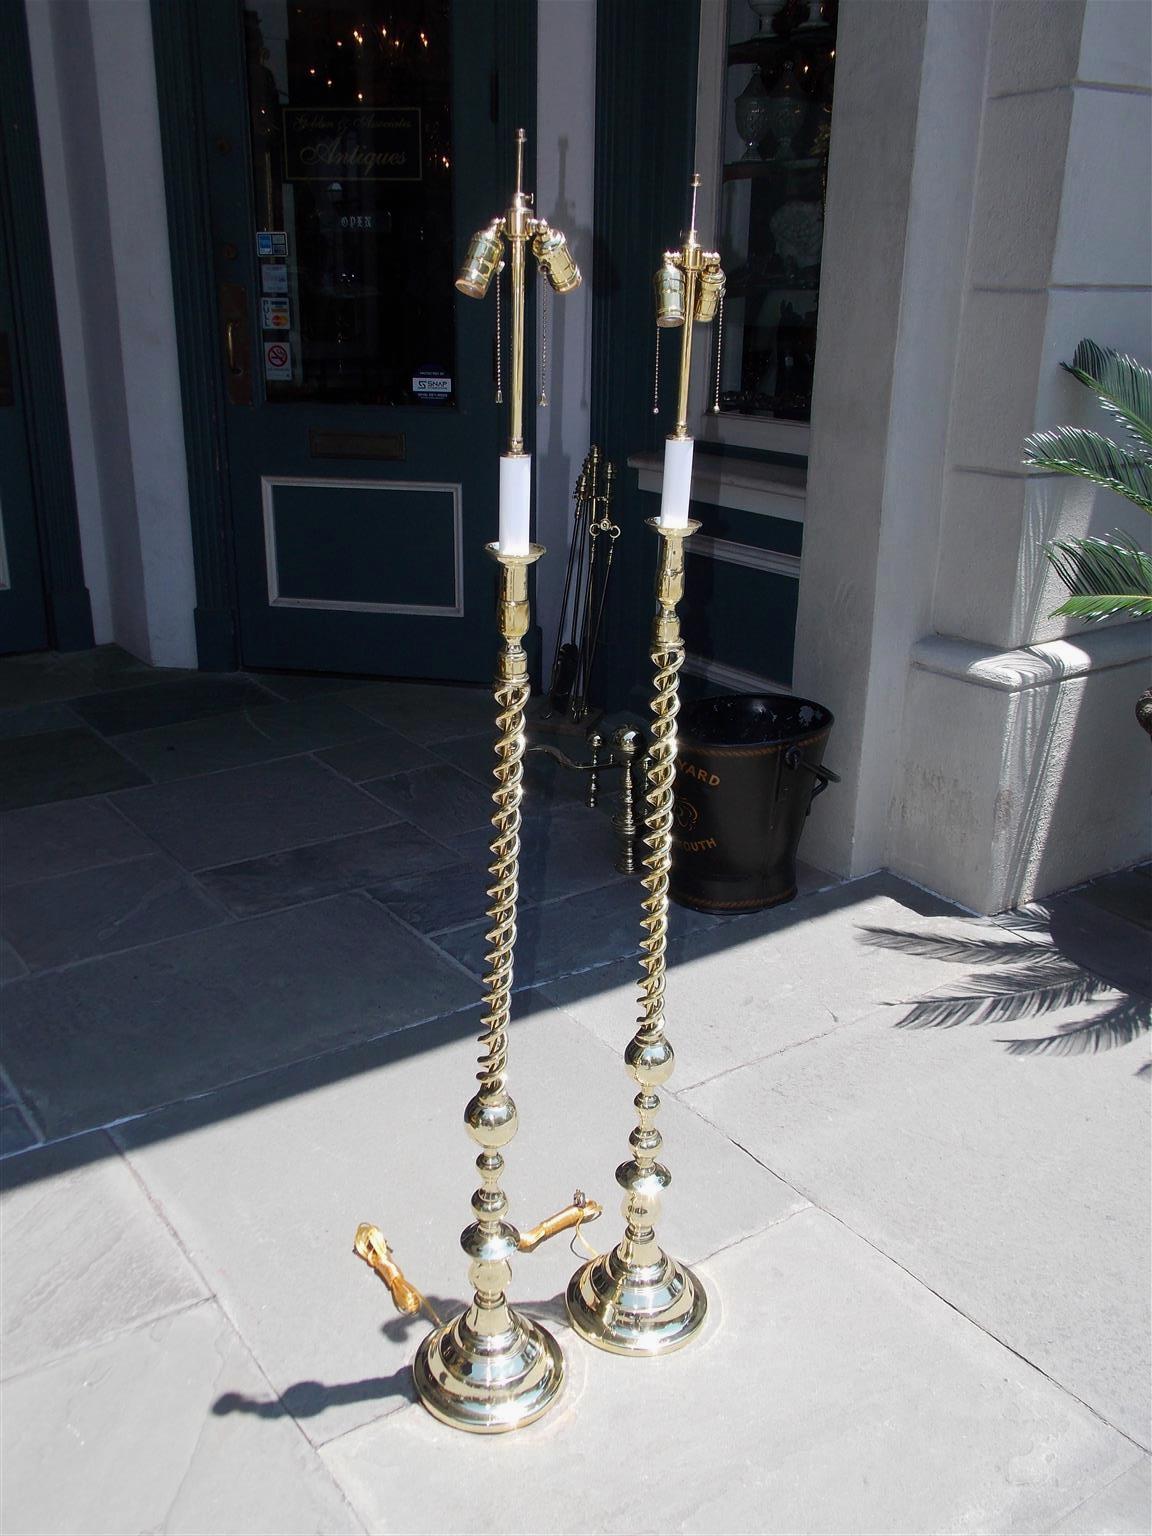 Pair of American brass spiral and bulbous form floor lamps resting on circular step back bases, Late 19th century. Pair were originally candle powered and have been electrified.